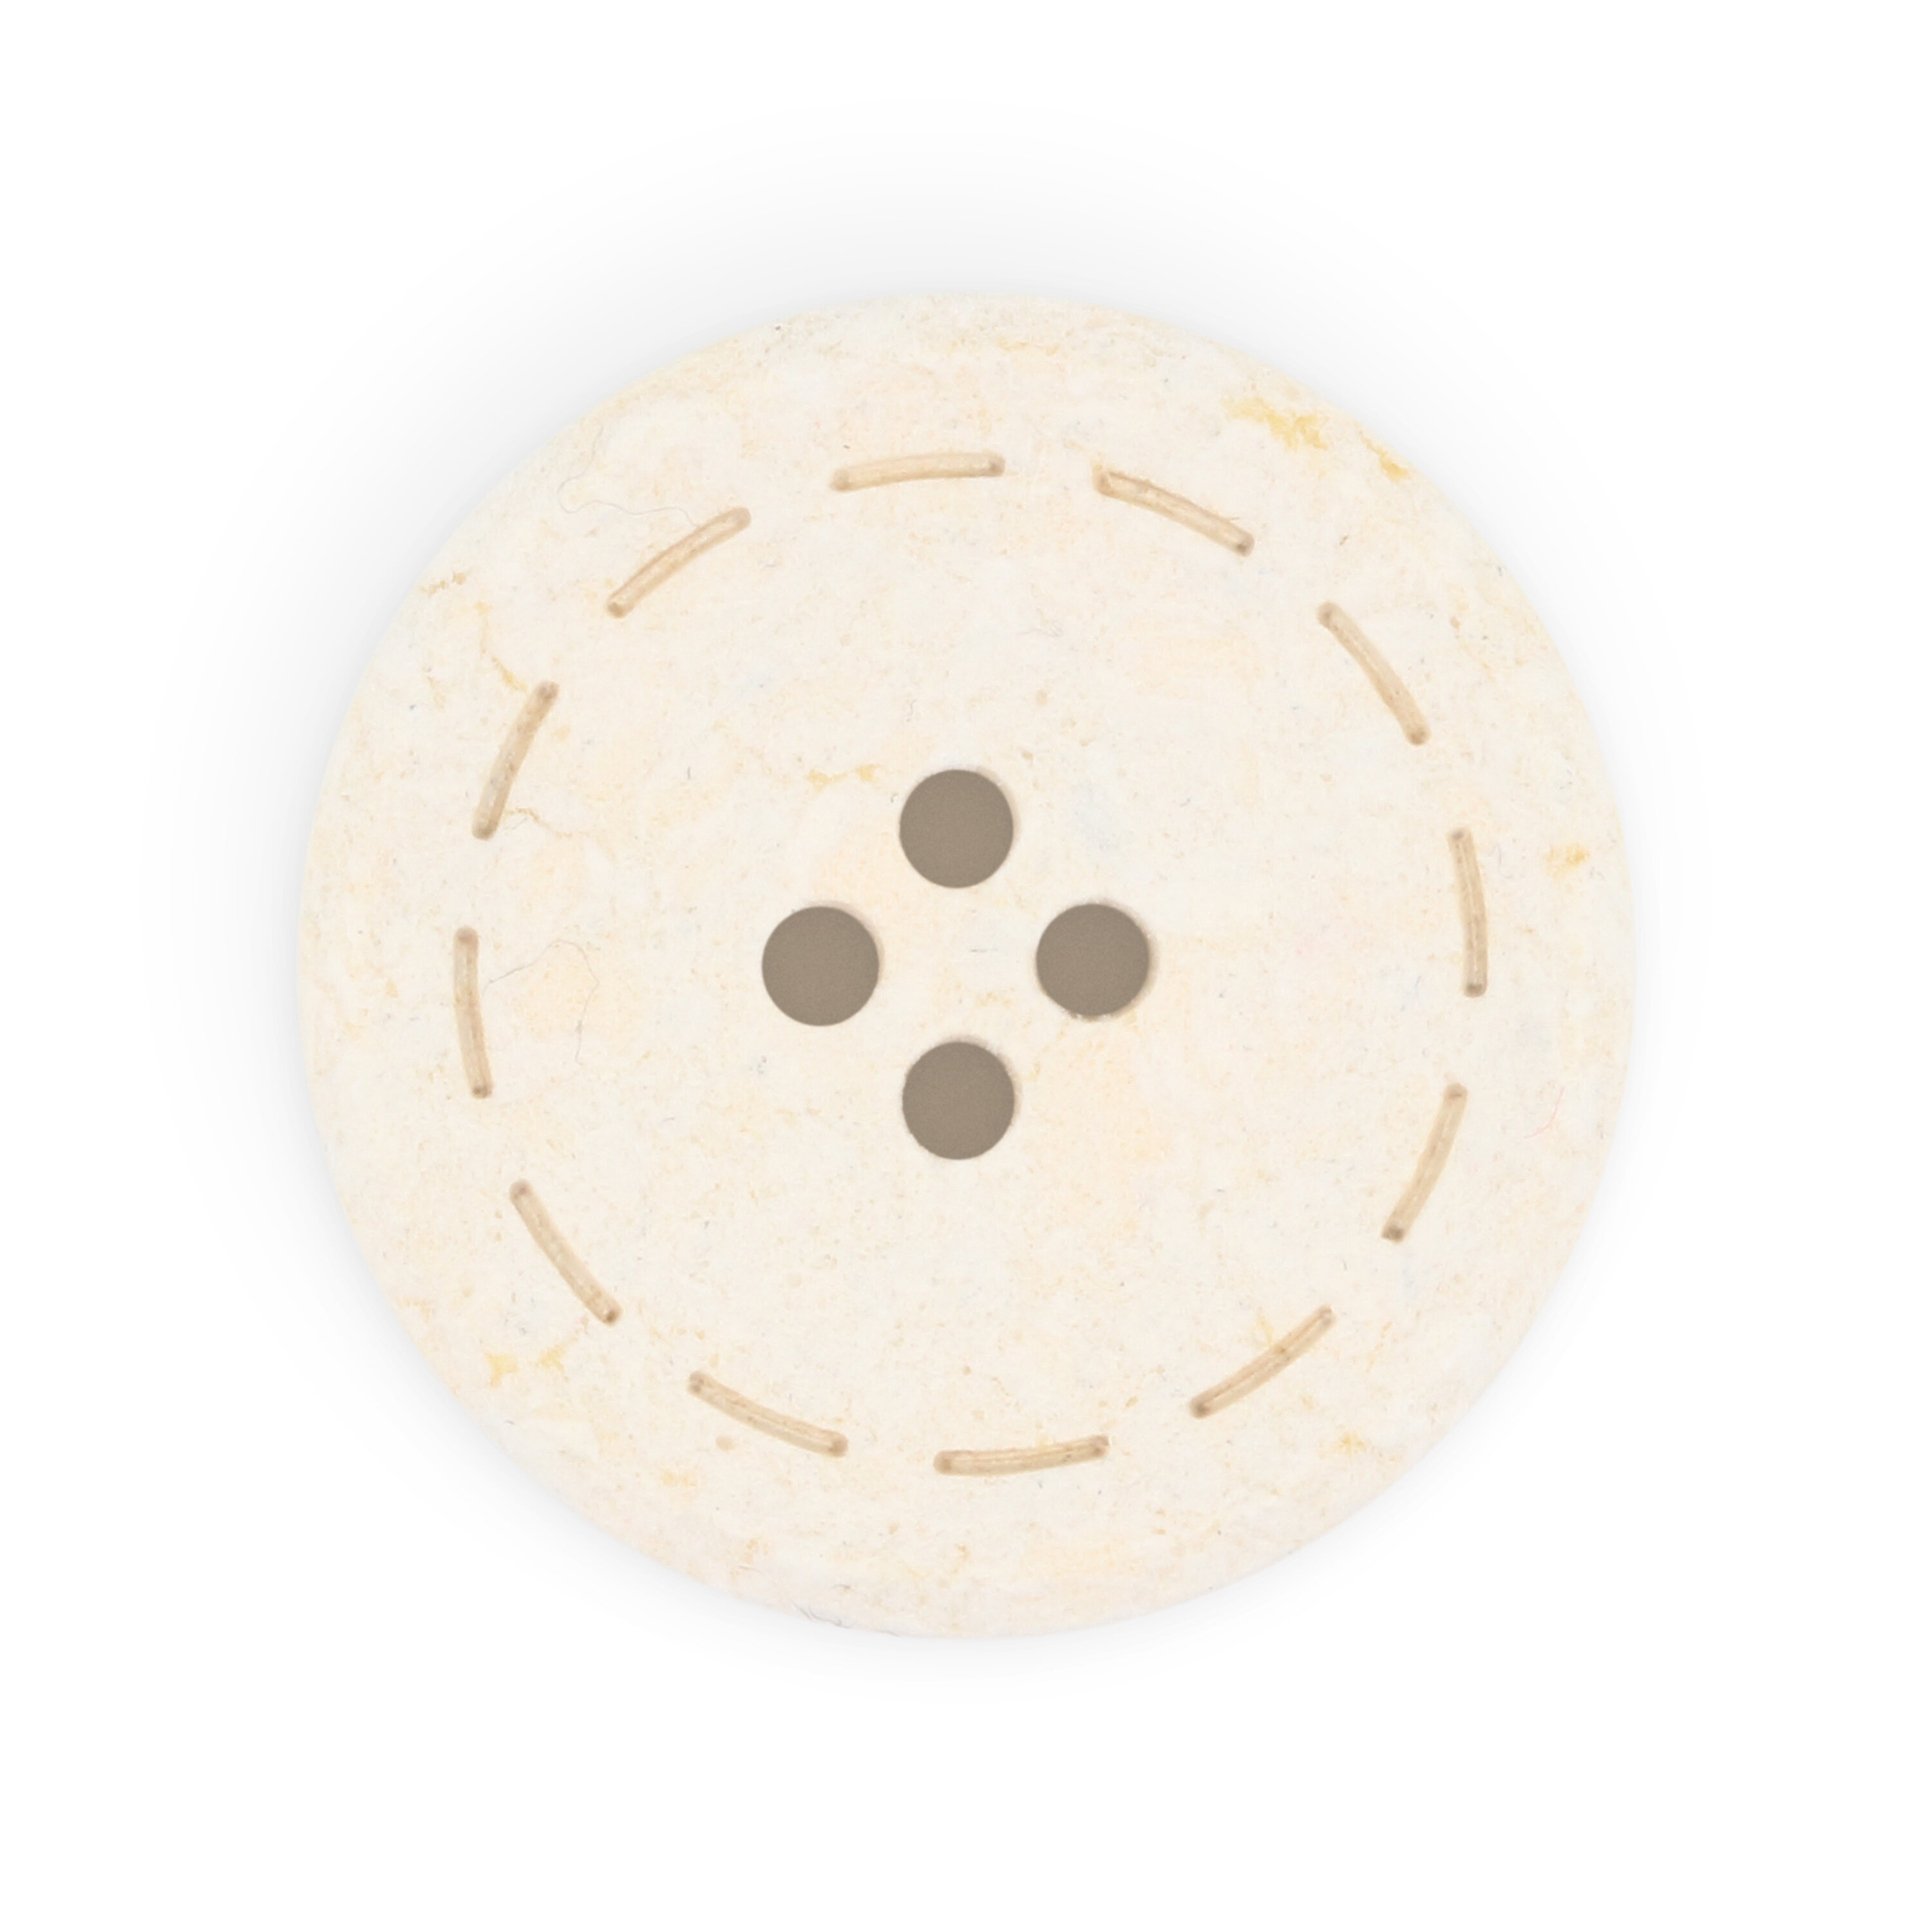 Dritz Recycled Cotton Round Stitch Button, 25mm, Natural, 6 Buttons